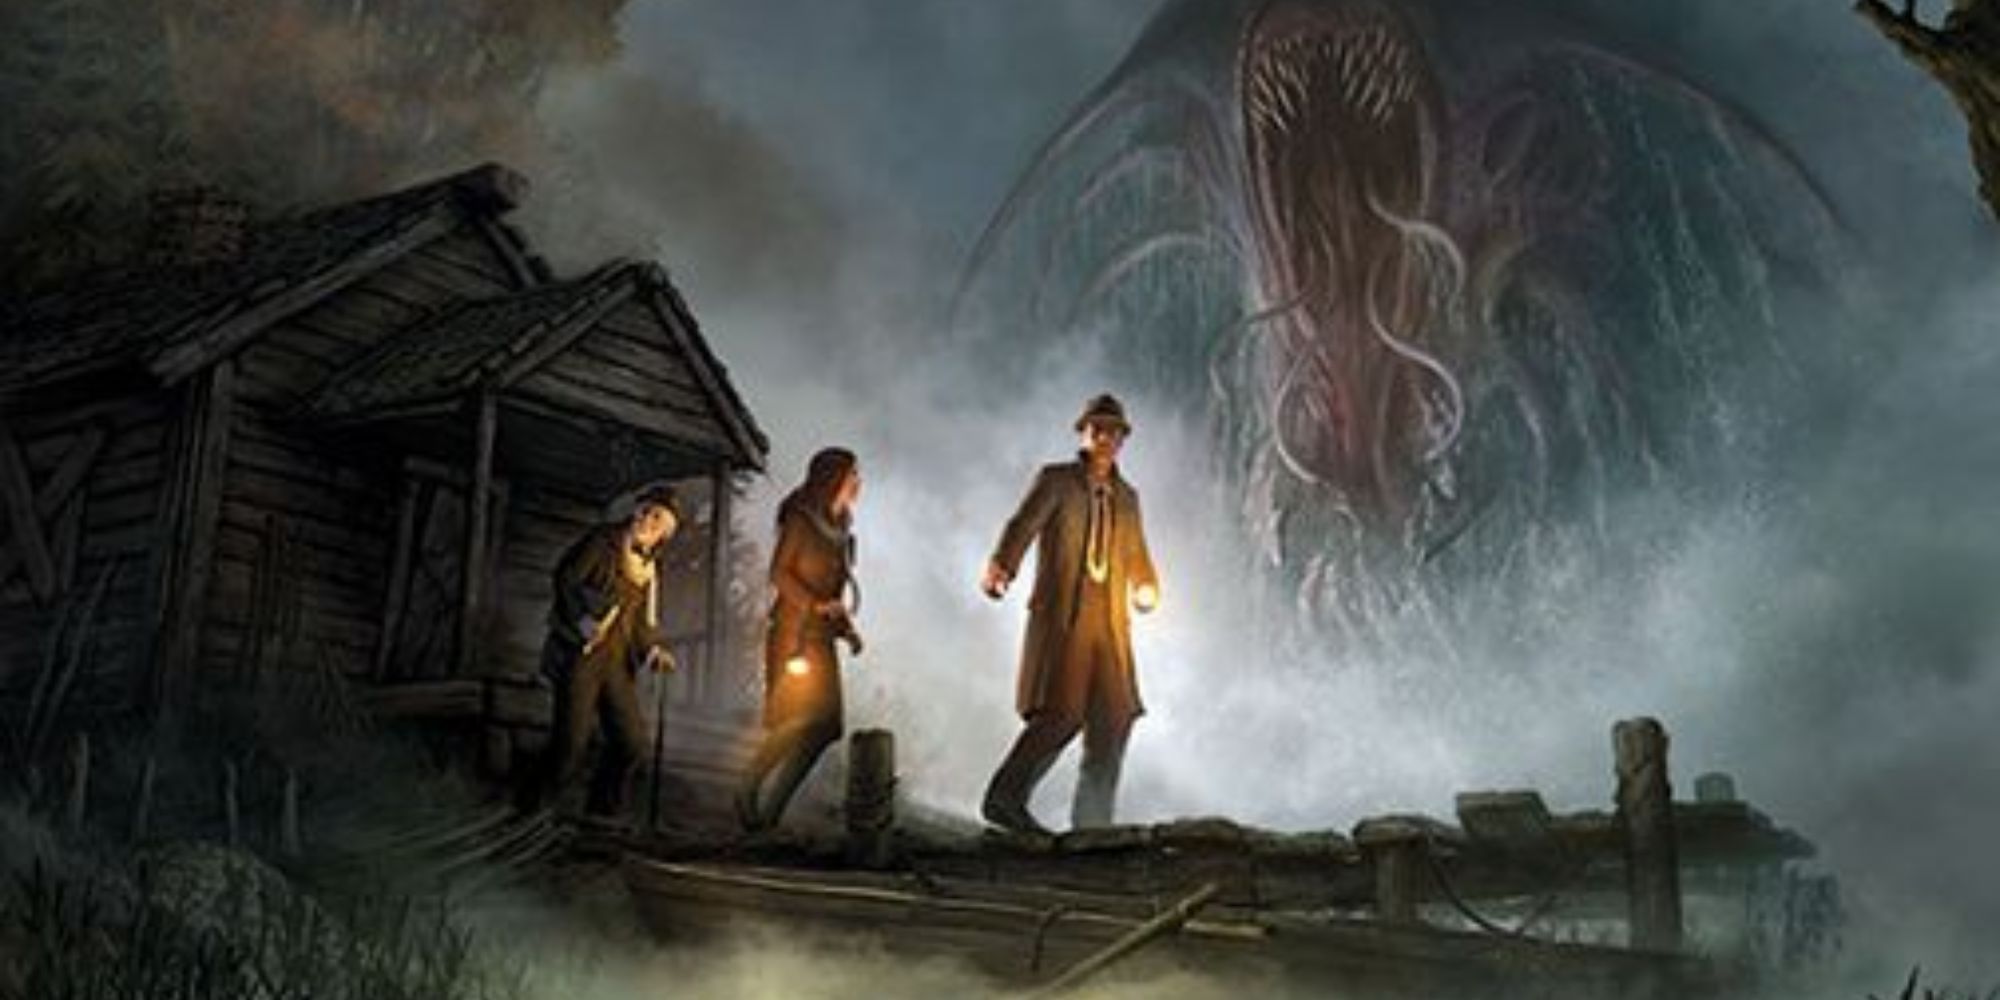 Call of Cthulhu Investigators Near Foggy Cabin With Creature